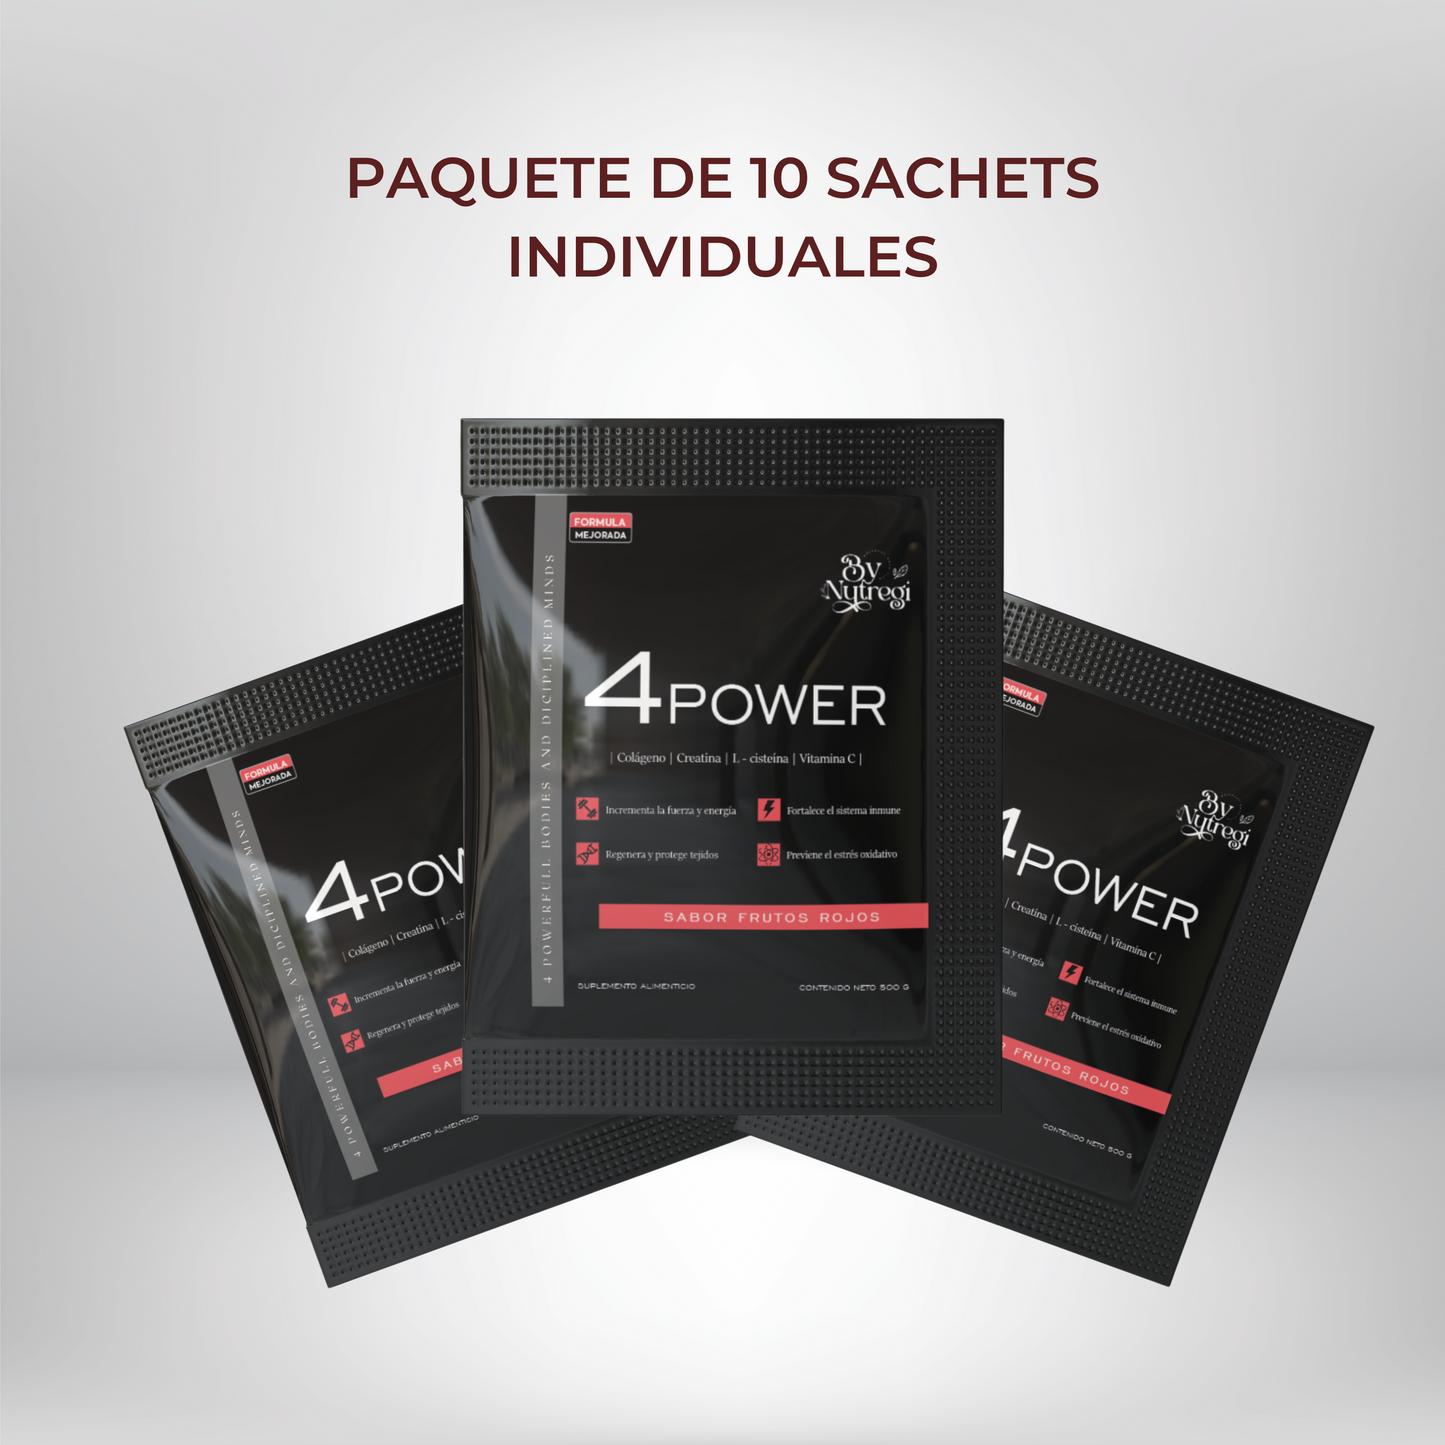 4 POWER- PAQUETE 10 SACHETS INDIVIDUALES